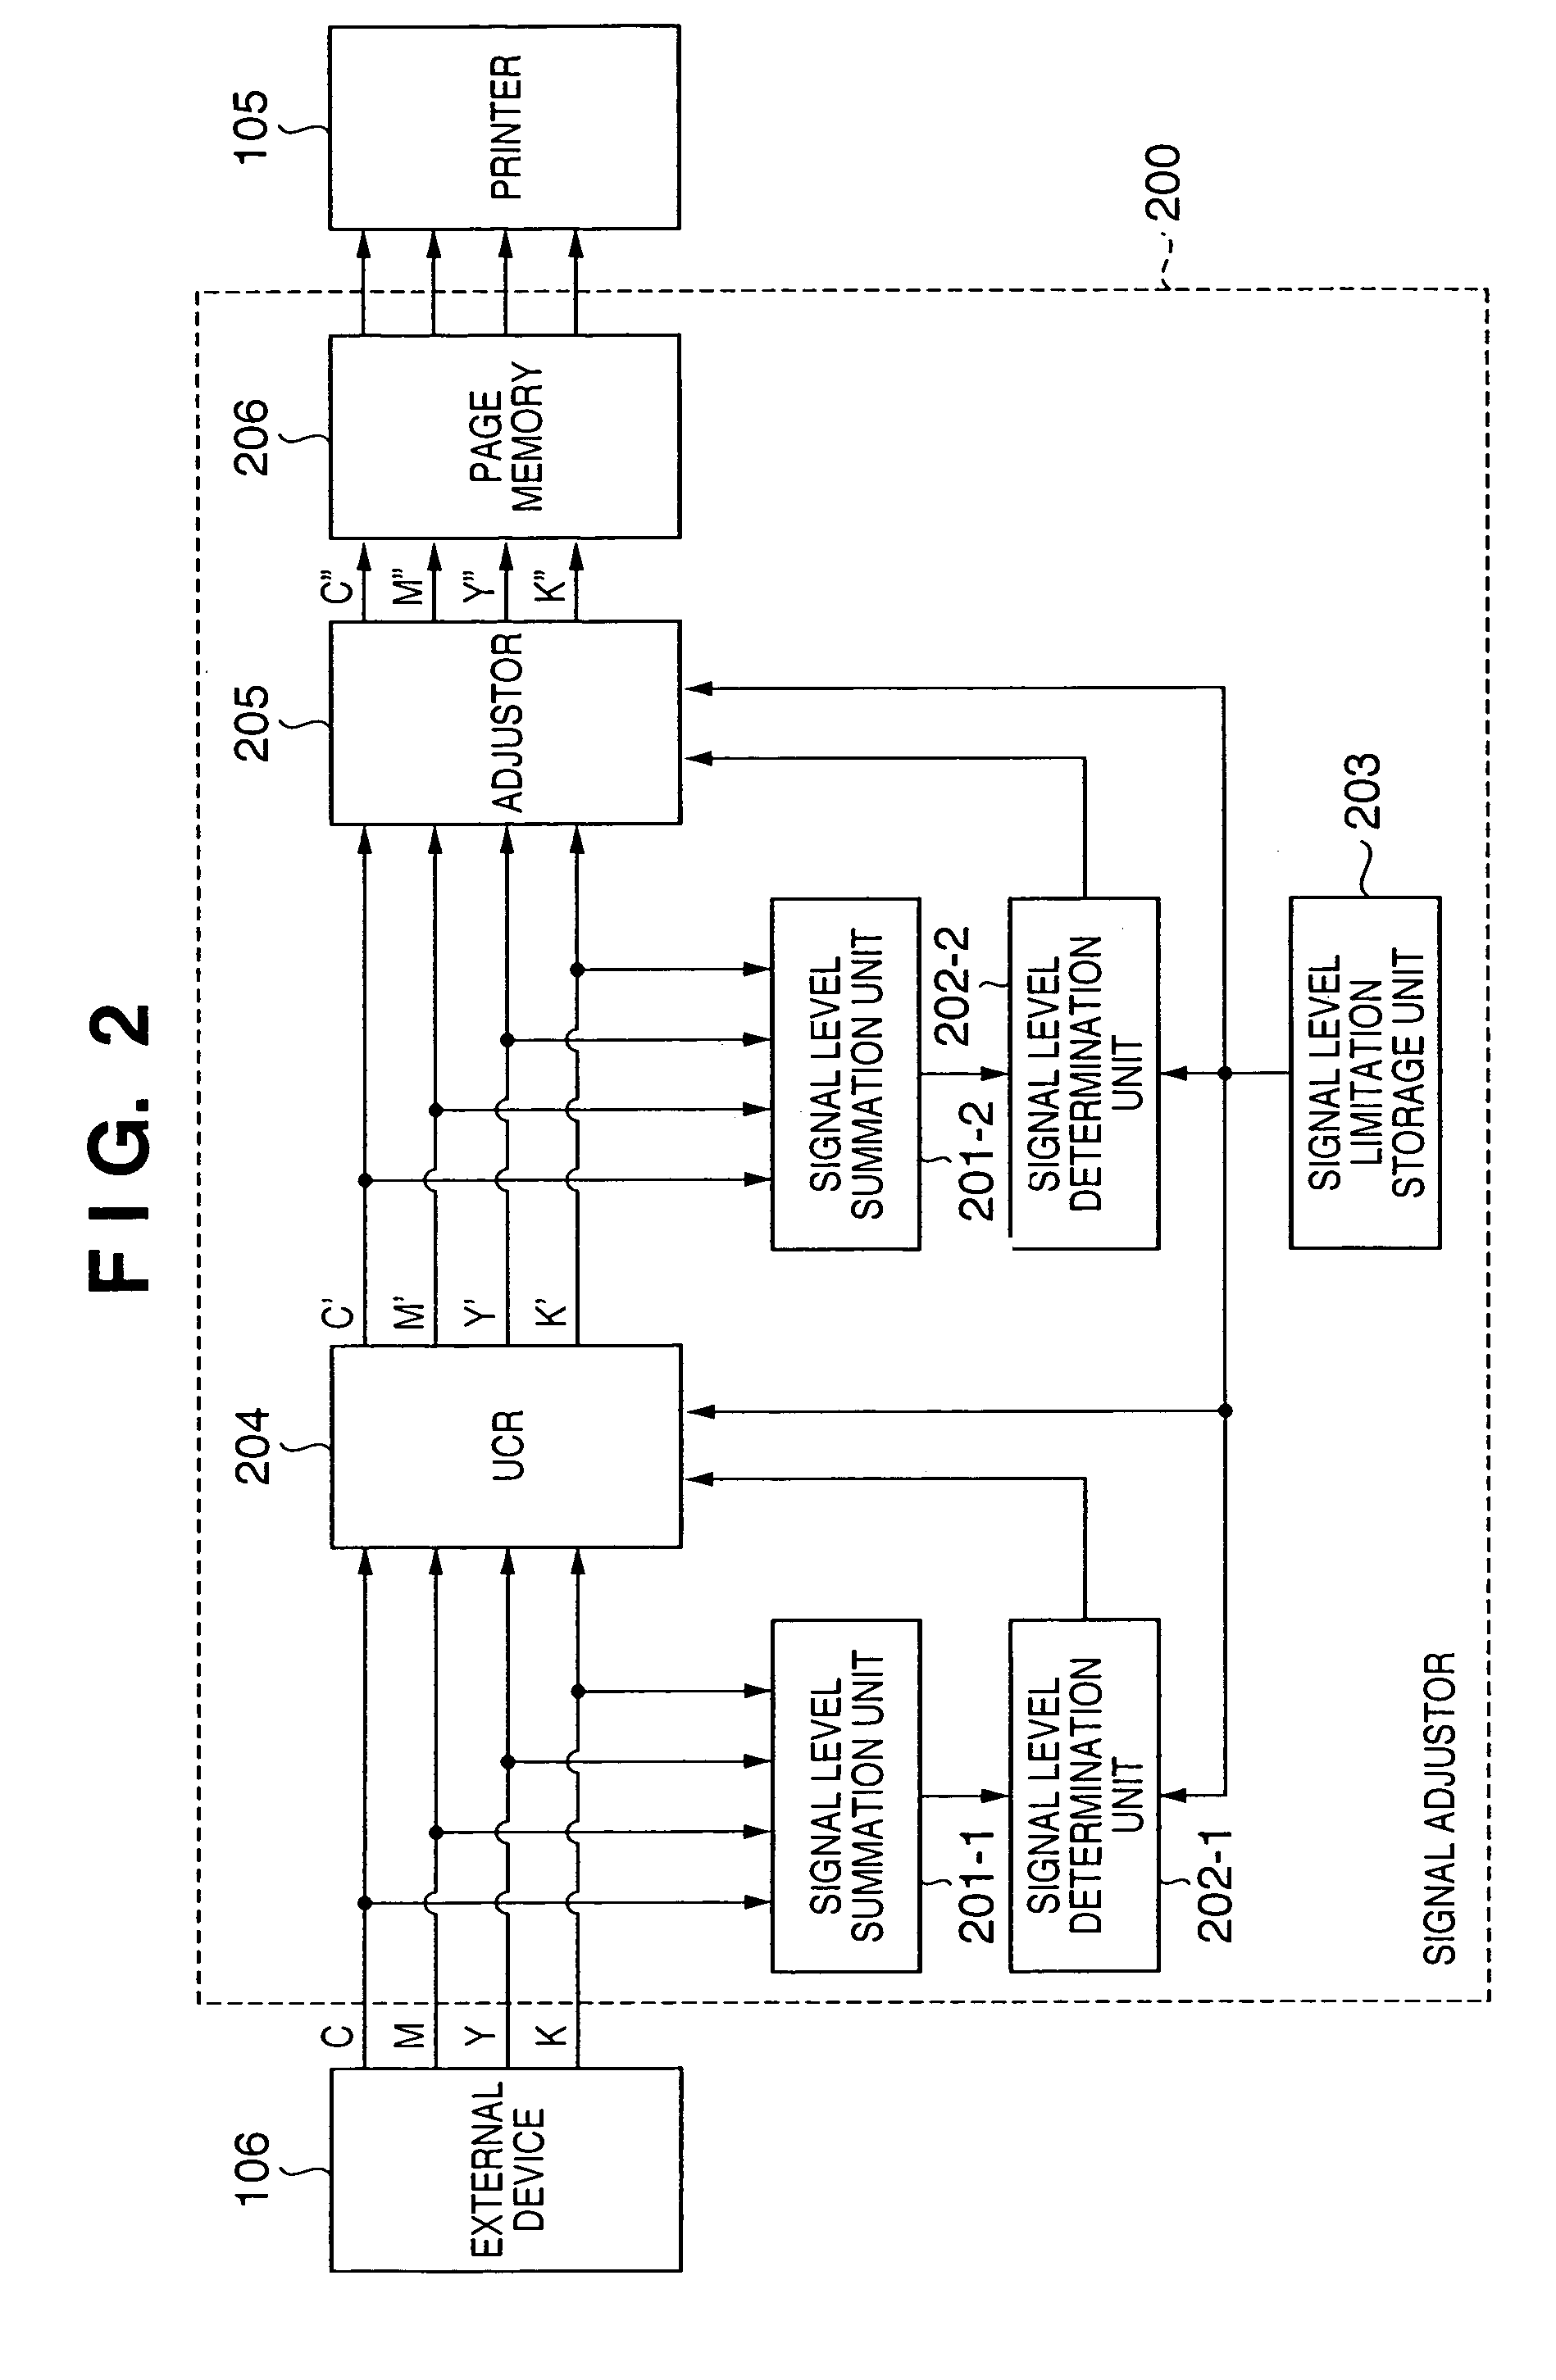 Recording material consumption control for an image forming apparatus